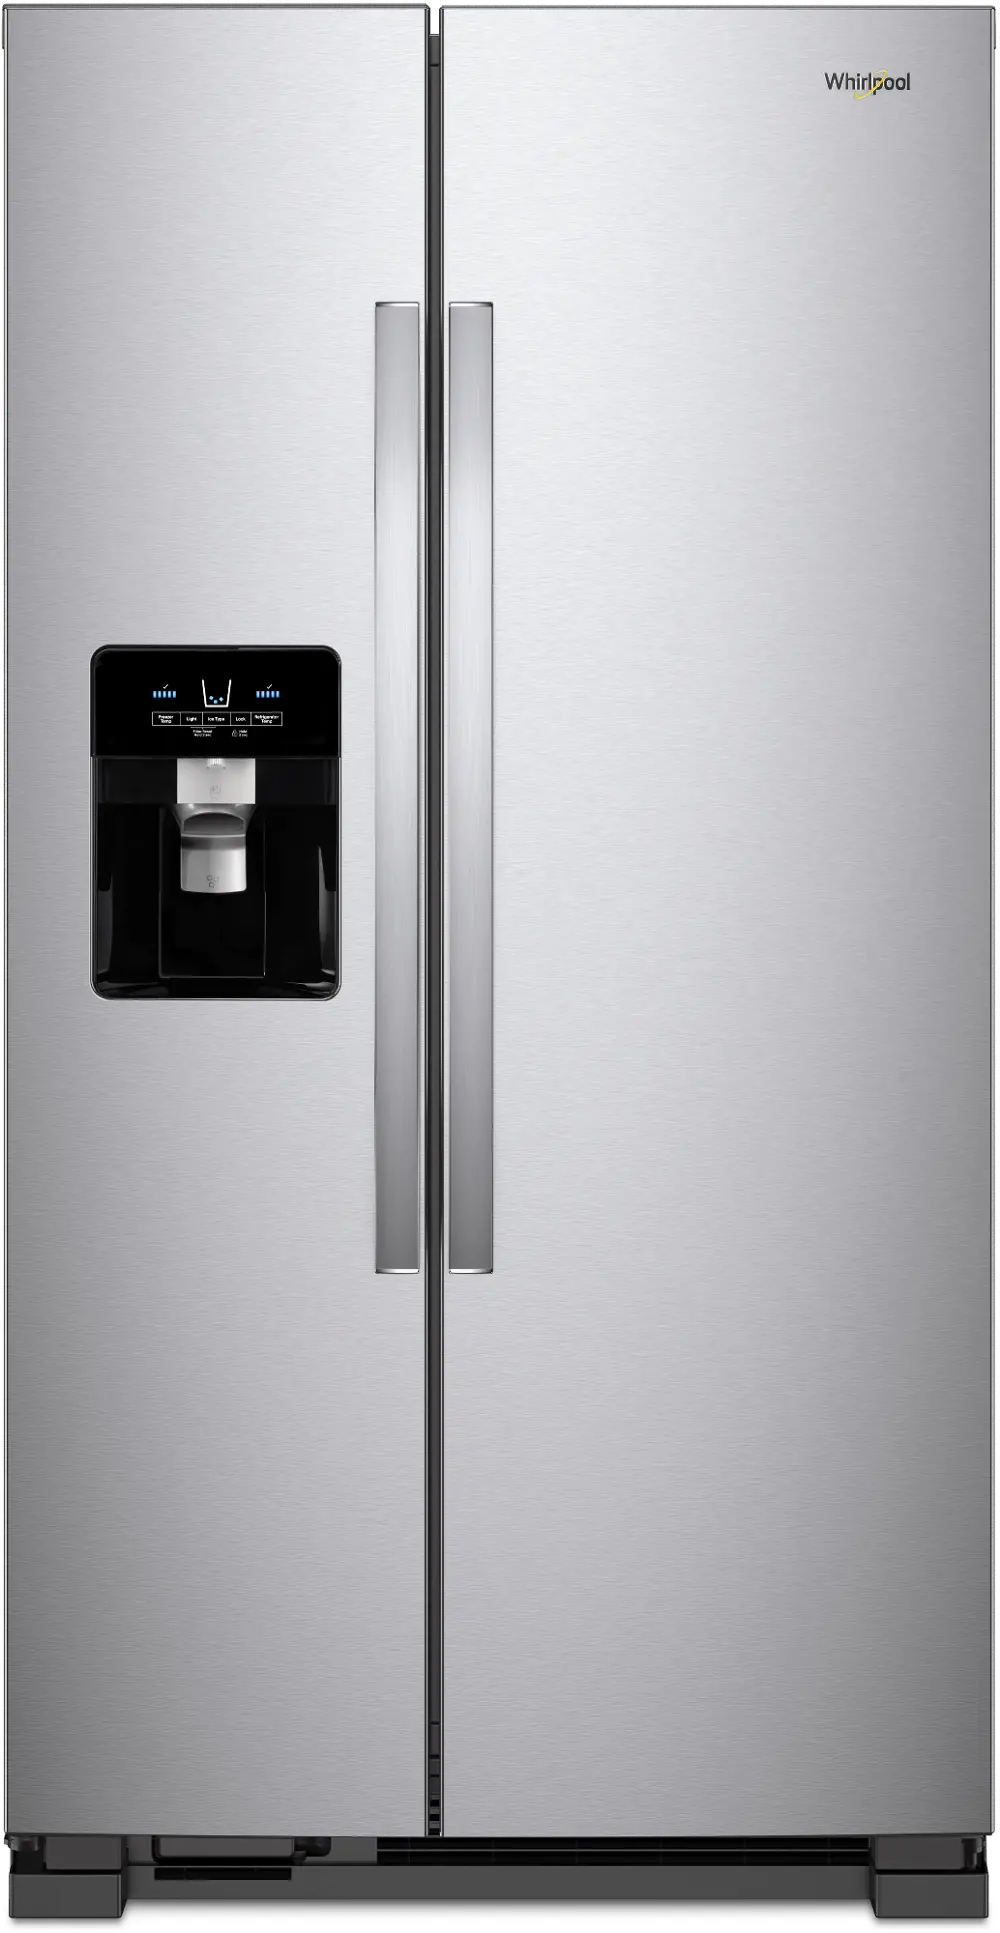 WRS325SDHZ-PROJECT Whirlpool 24.55 cu ft Side by Side Refrigerator - Stainless Steel-1